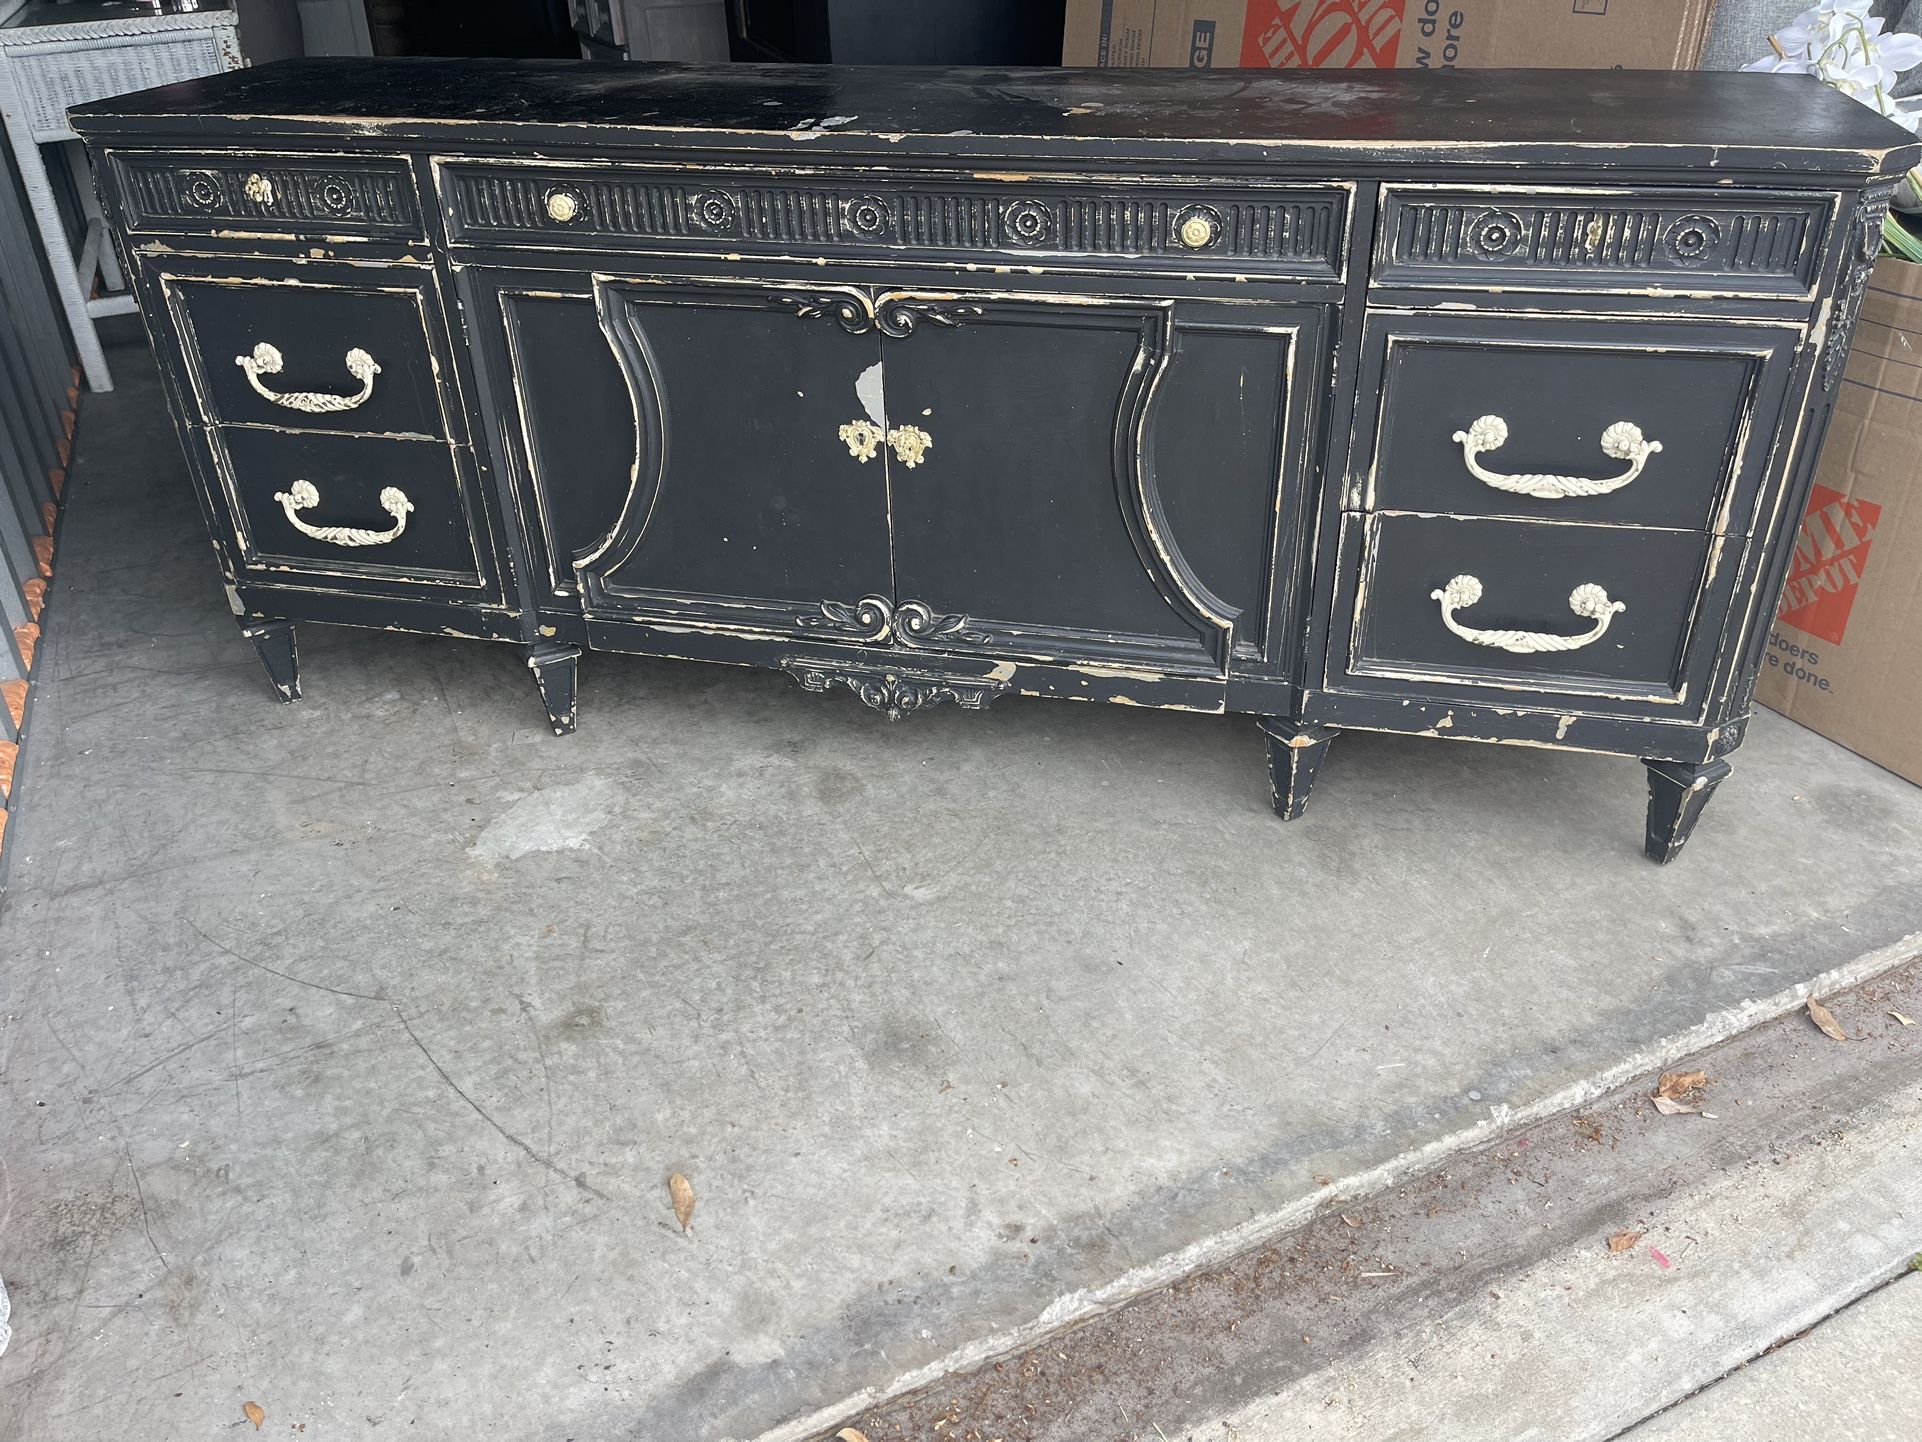 Vintage Dresser - Used But In good Condition